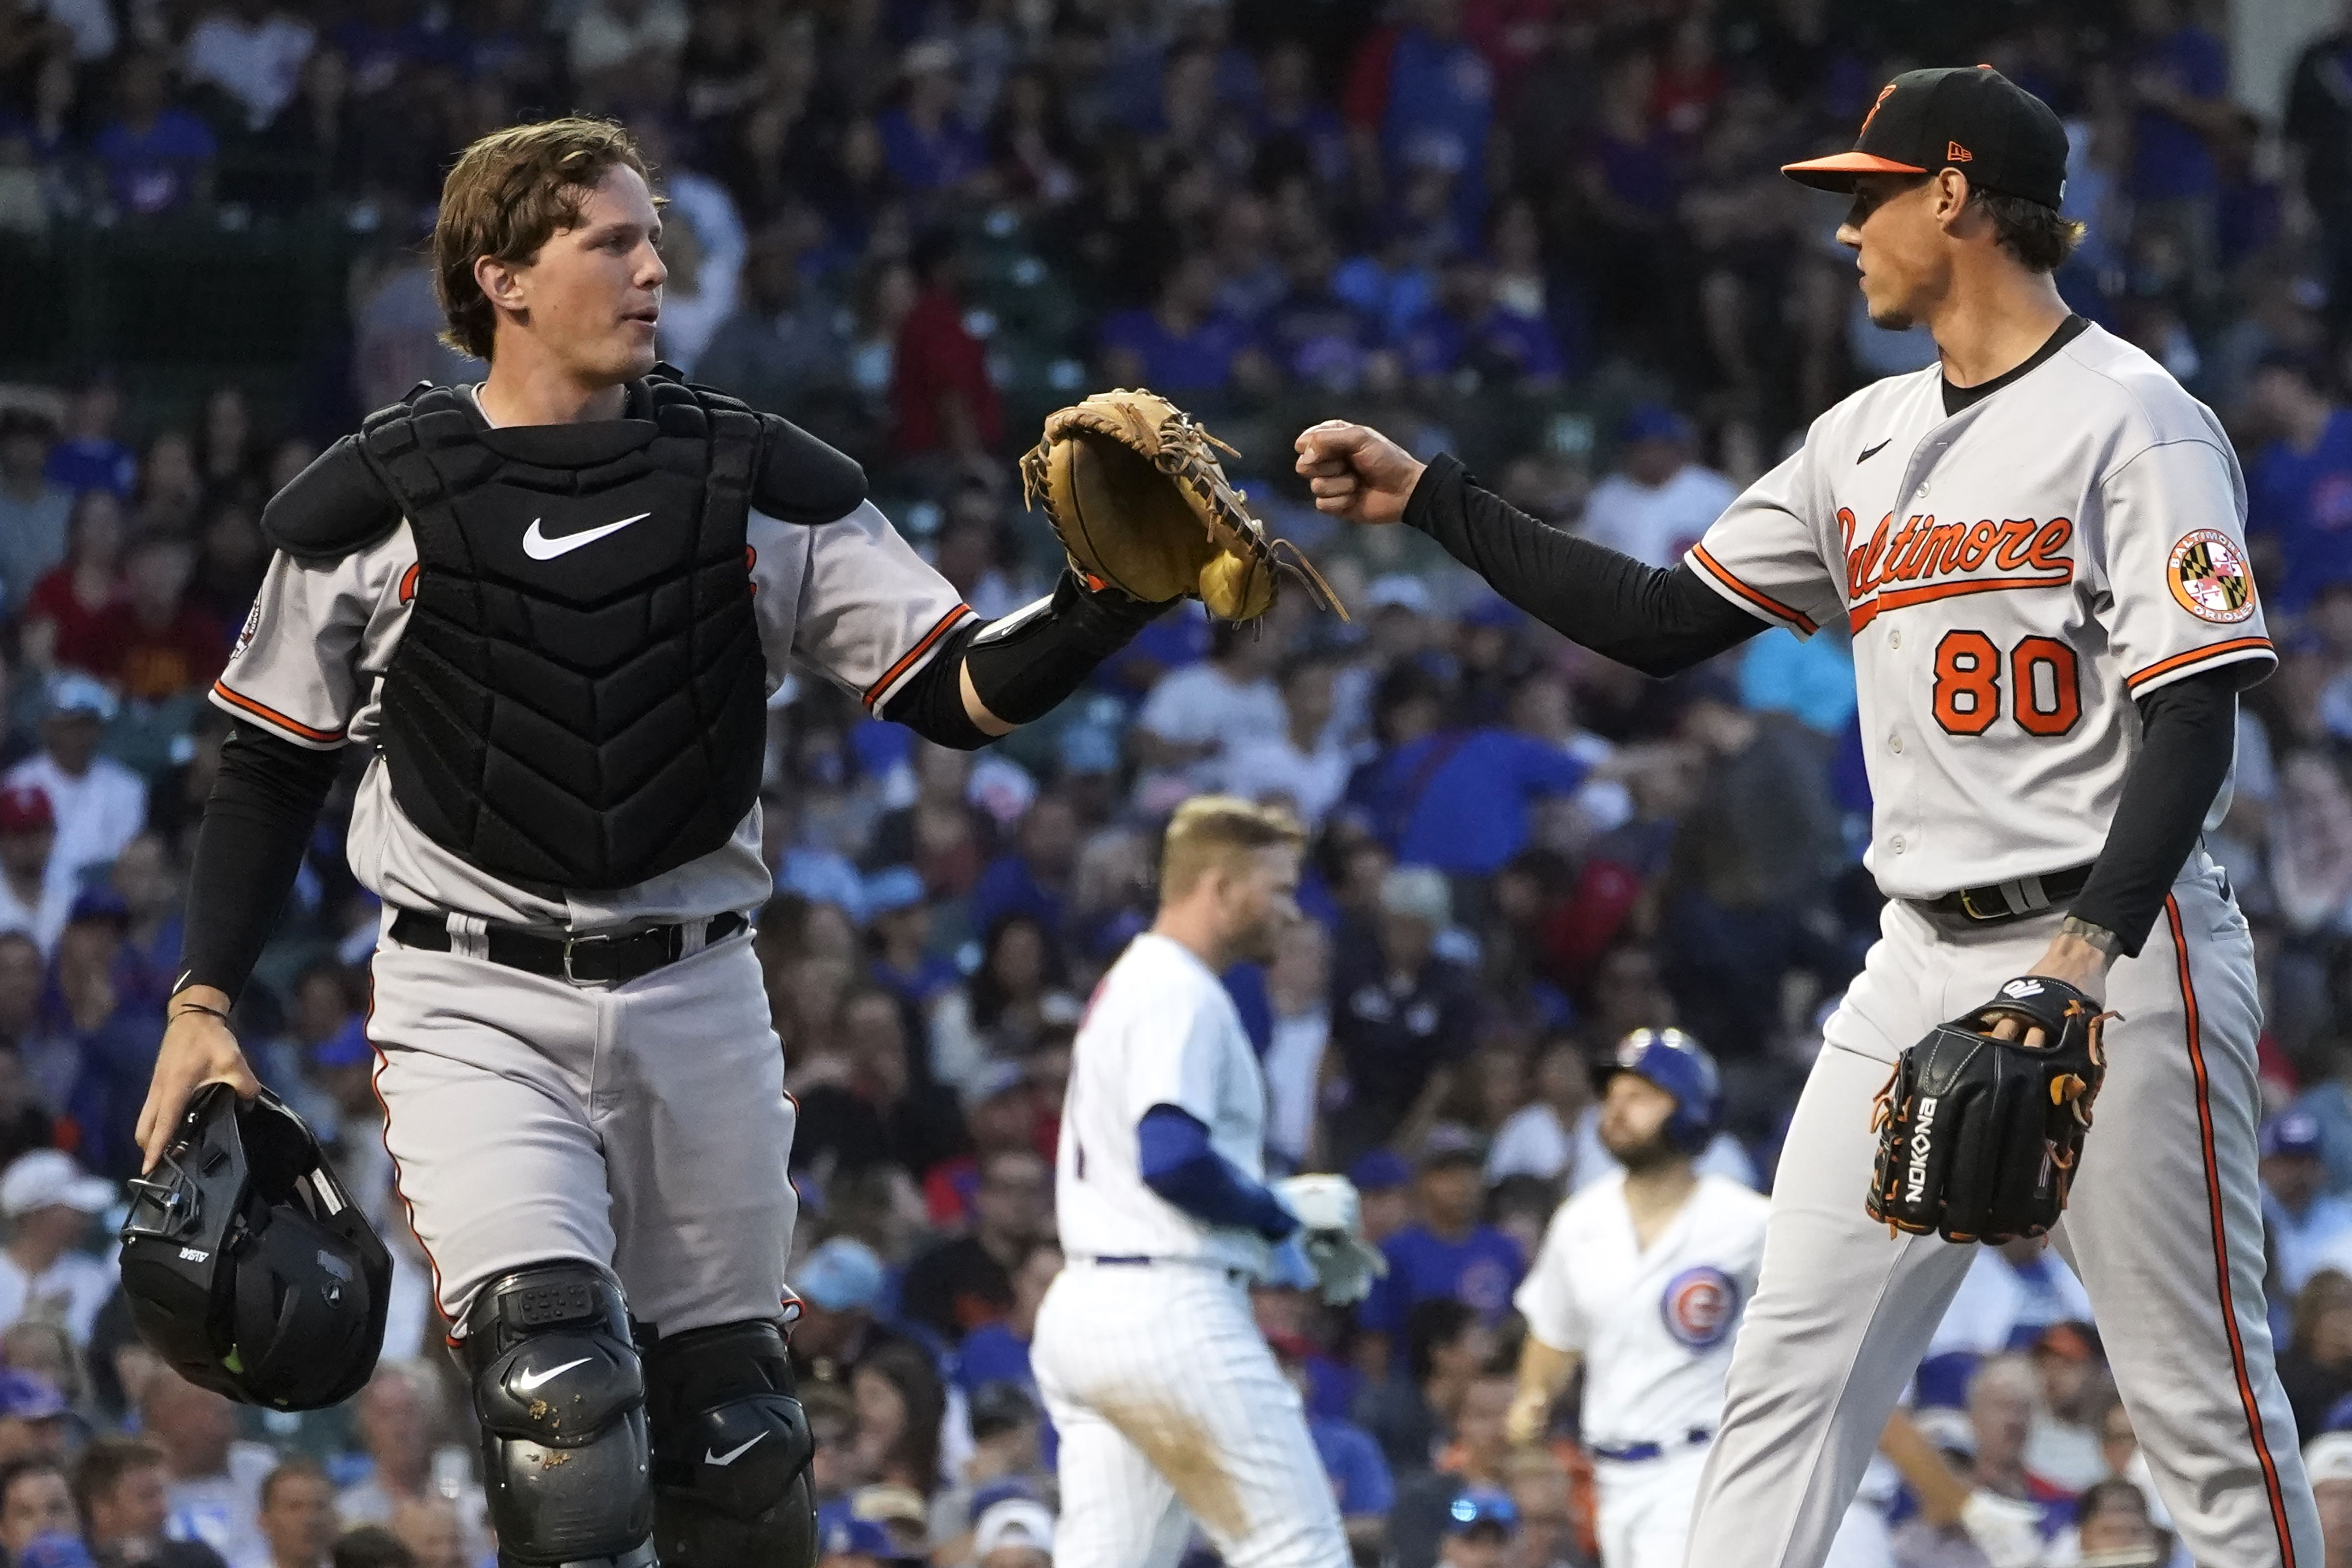 Trey Mancini Looks To Rejuvenate His Career With The Chicago Cubs